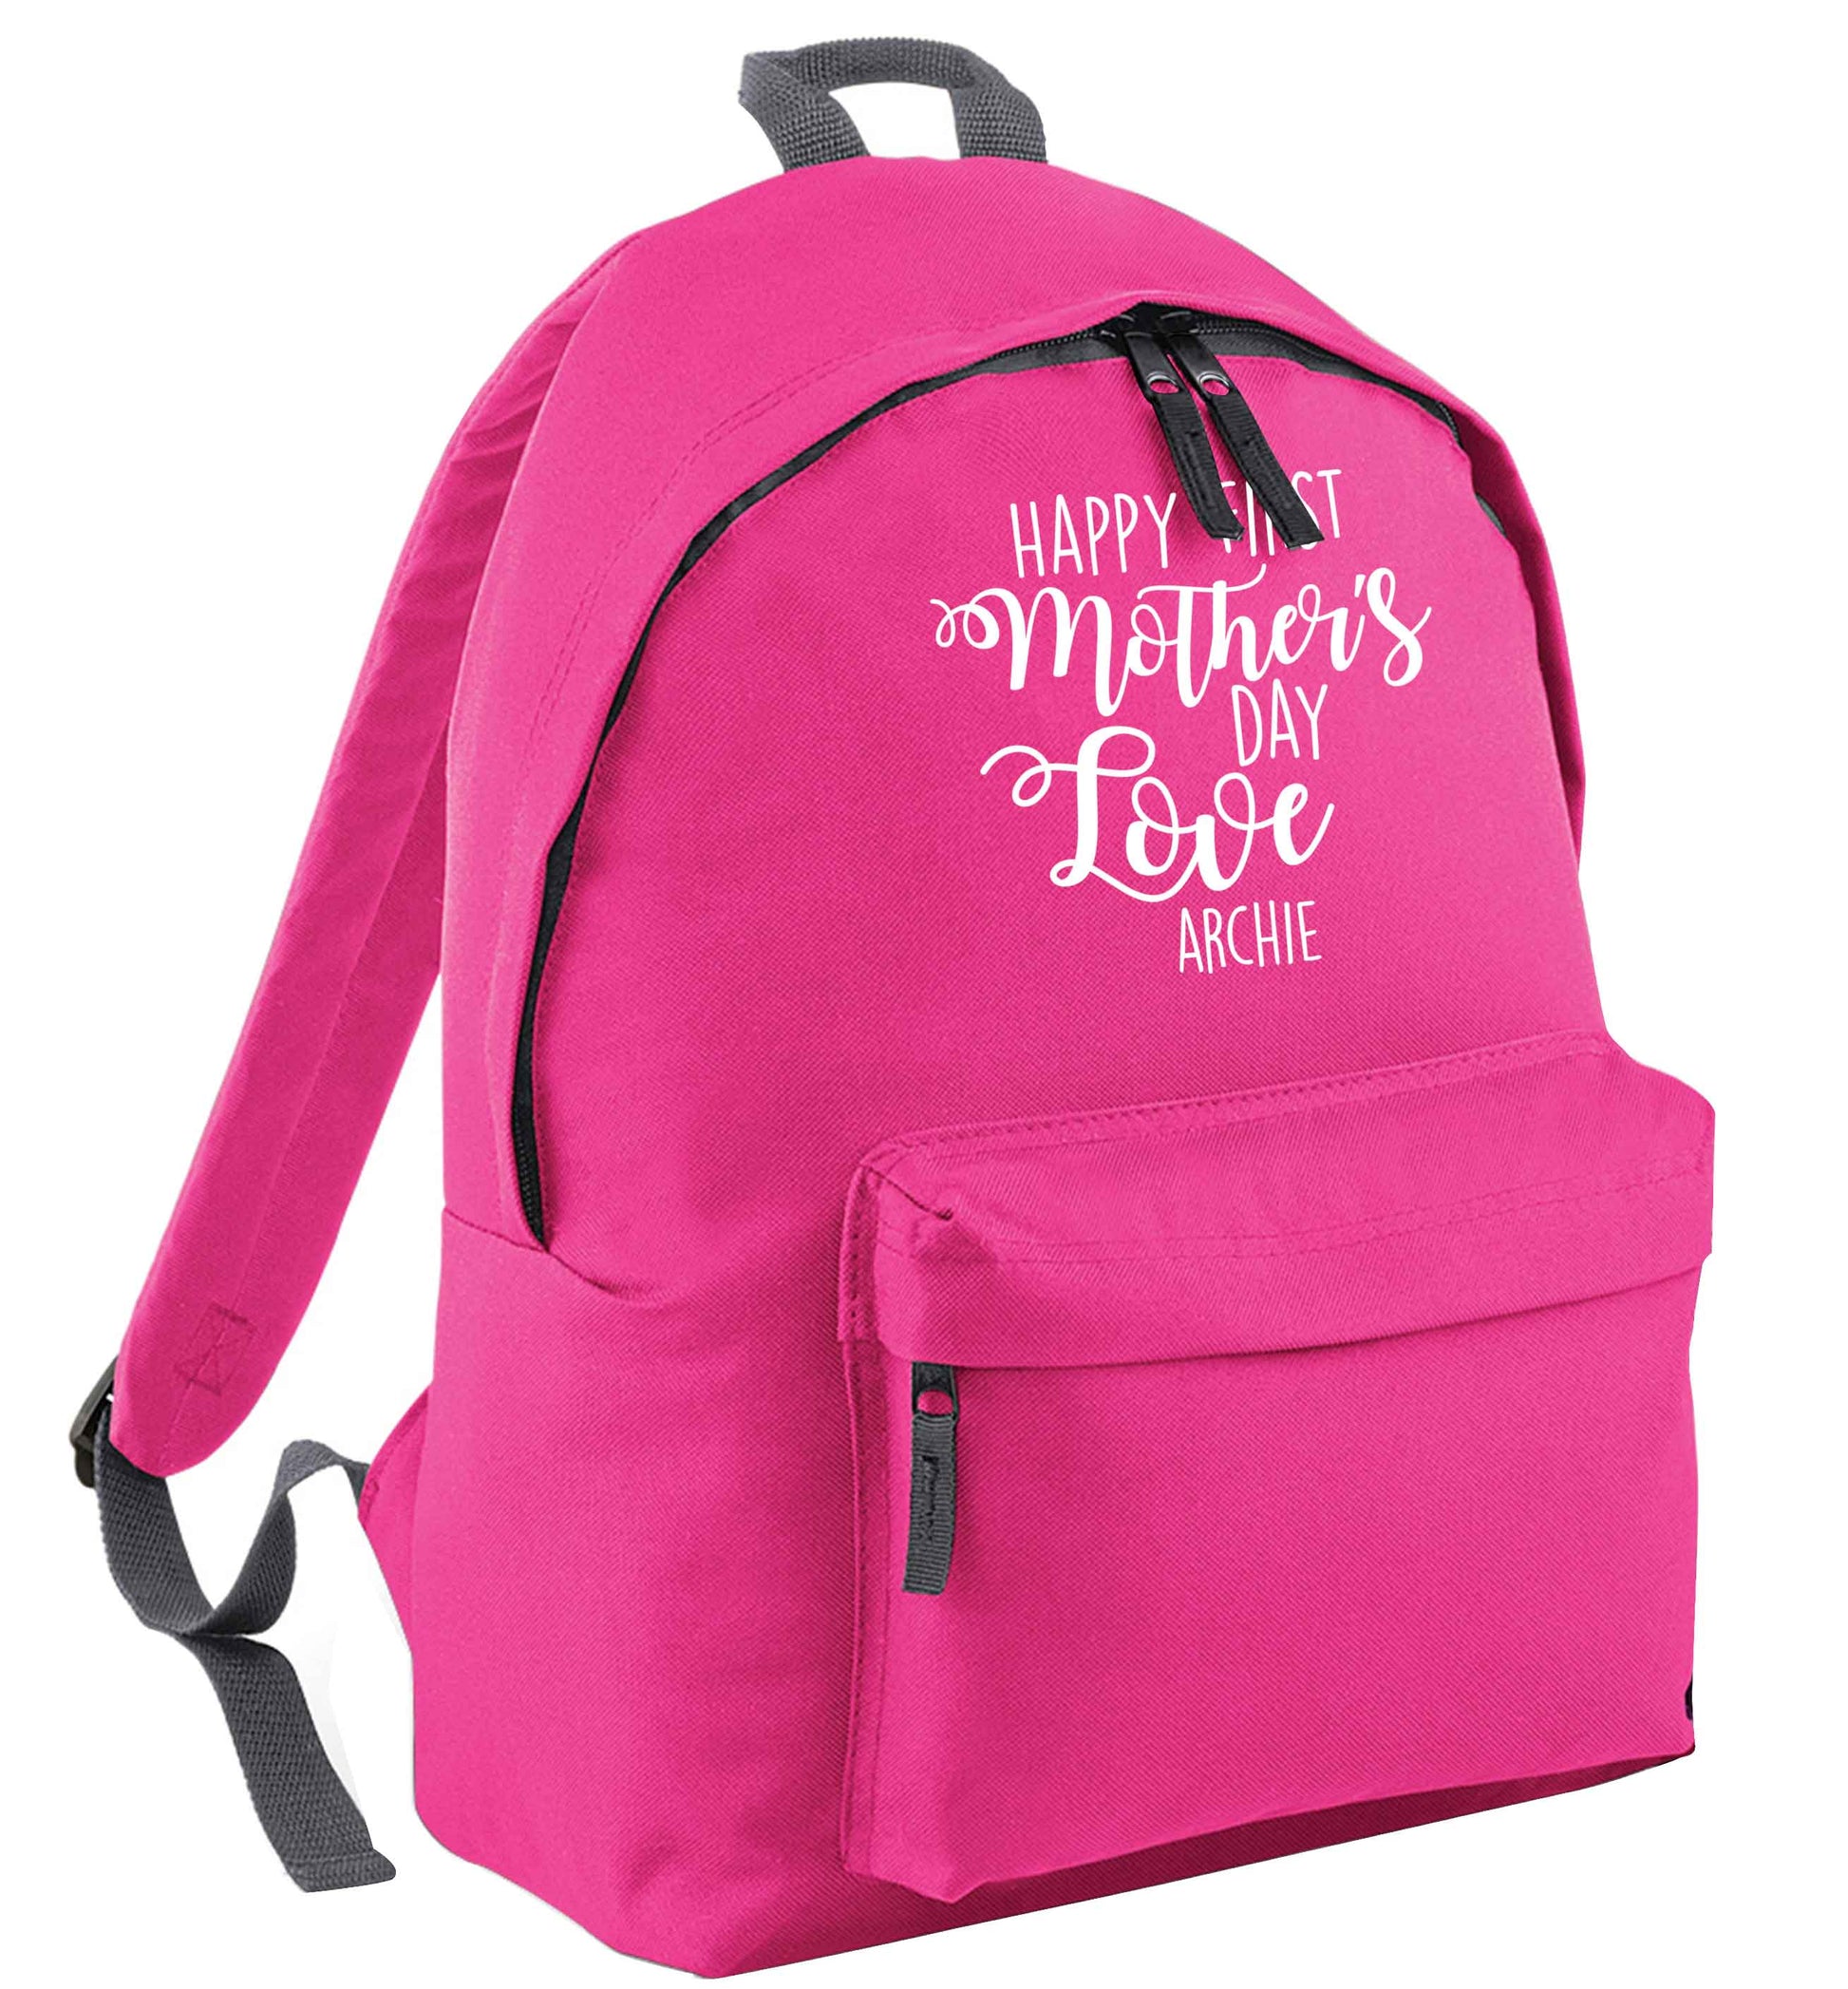 Mummy's first mother's day! pink childrens backpack